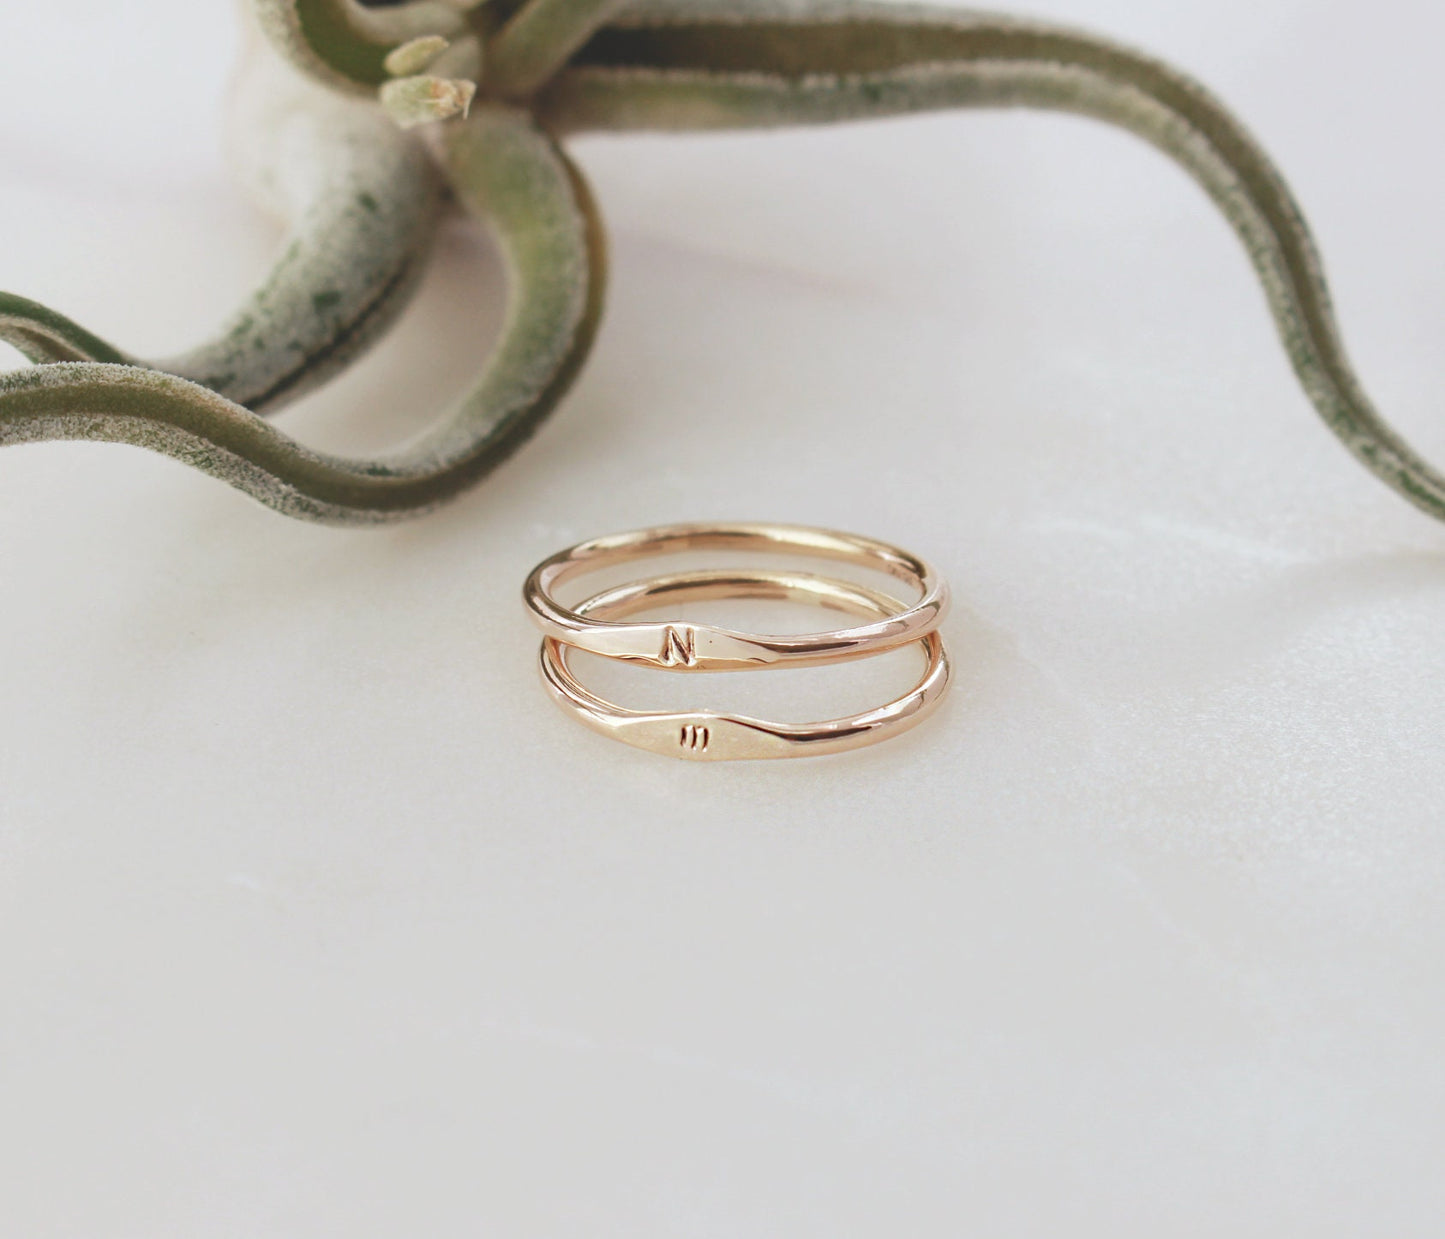 Signet Initial Ring  - 14k Gold Filled 1.5mm Thick Ring, Sans Serif Font  1mm - 1.5mm Uppercase/Lowercase, Personalized, Monogram, Stackable